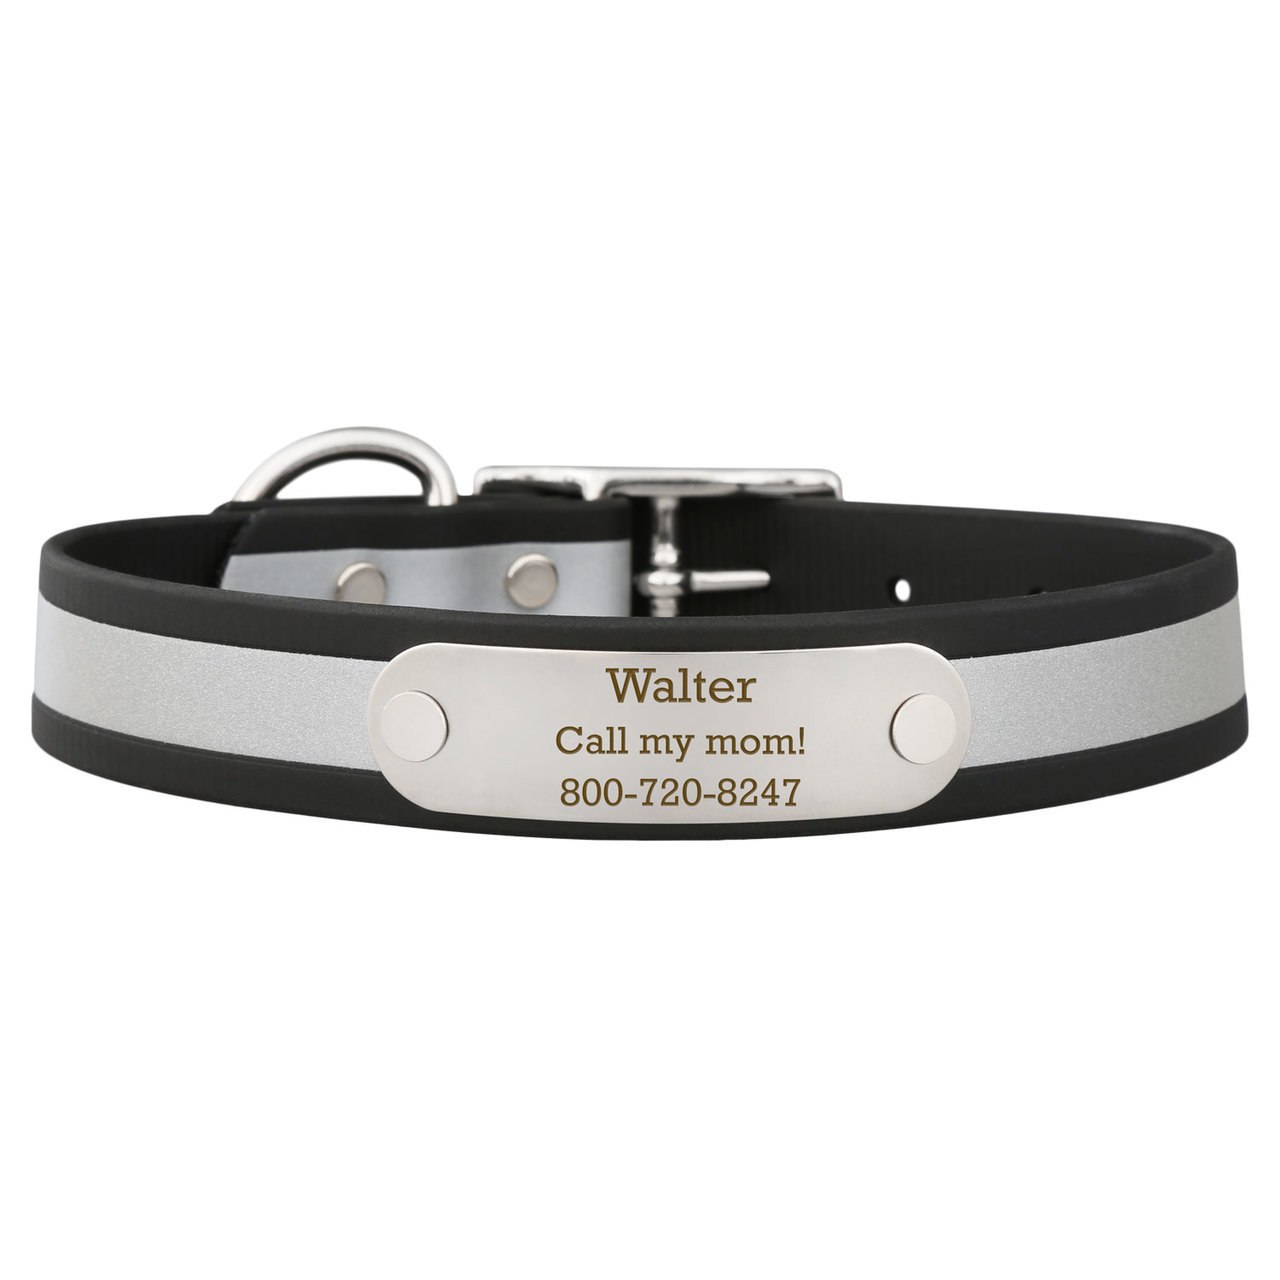 Reflective Waterproof Soft Grip Dog Collar with Nameplate Black